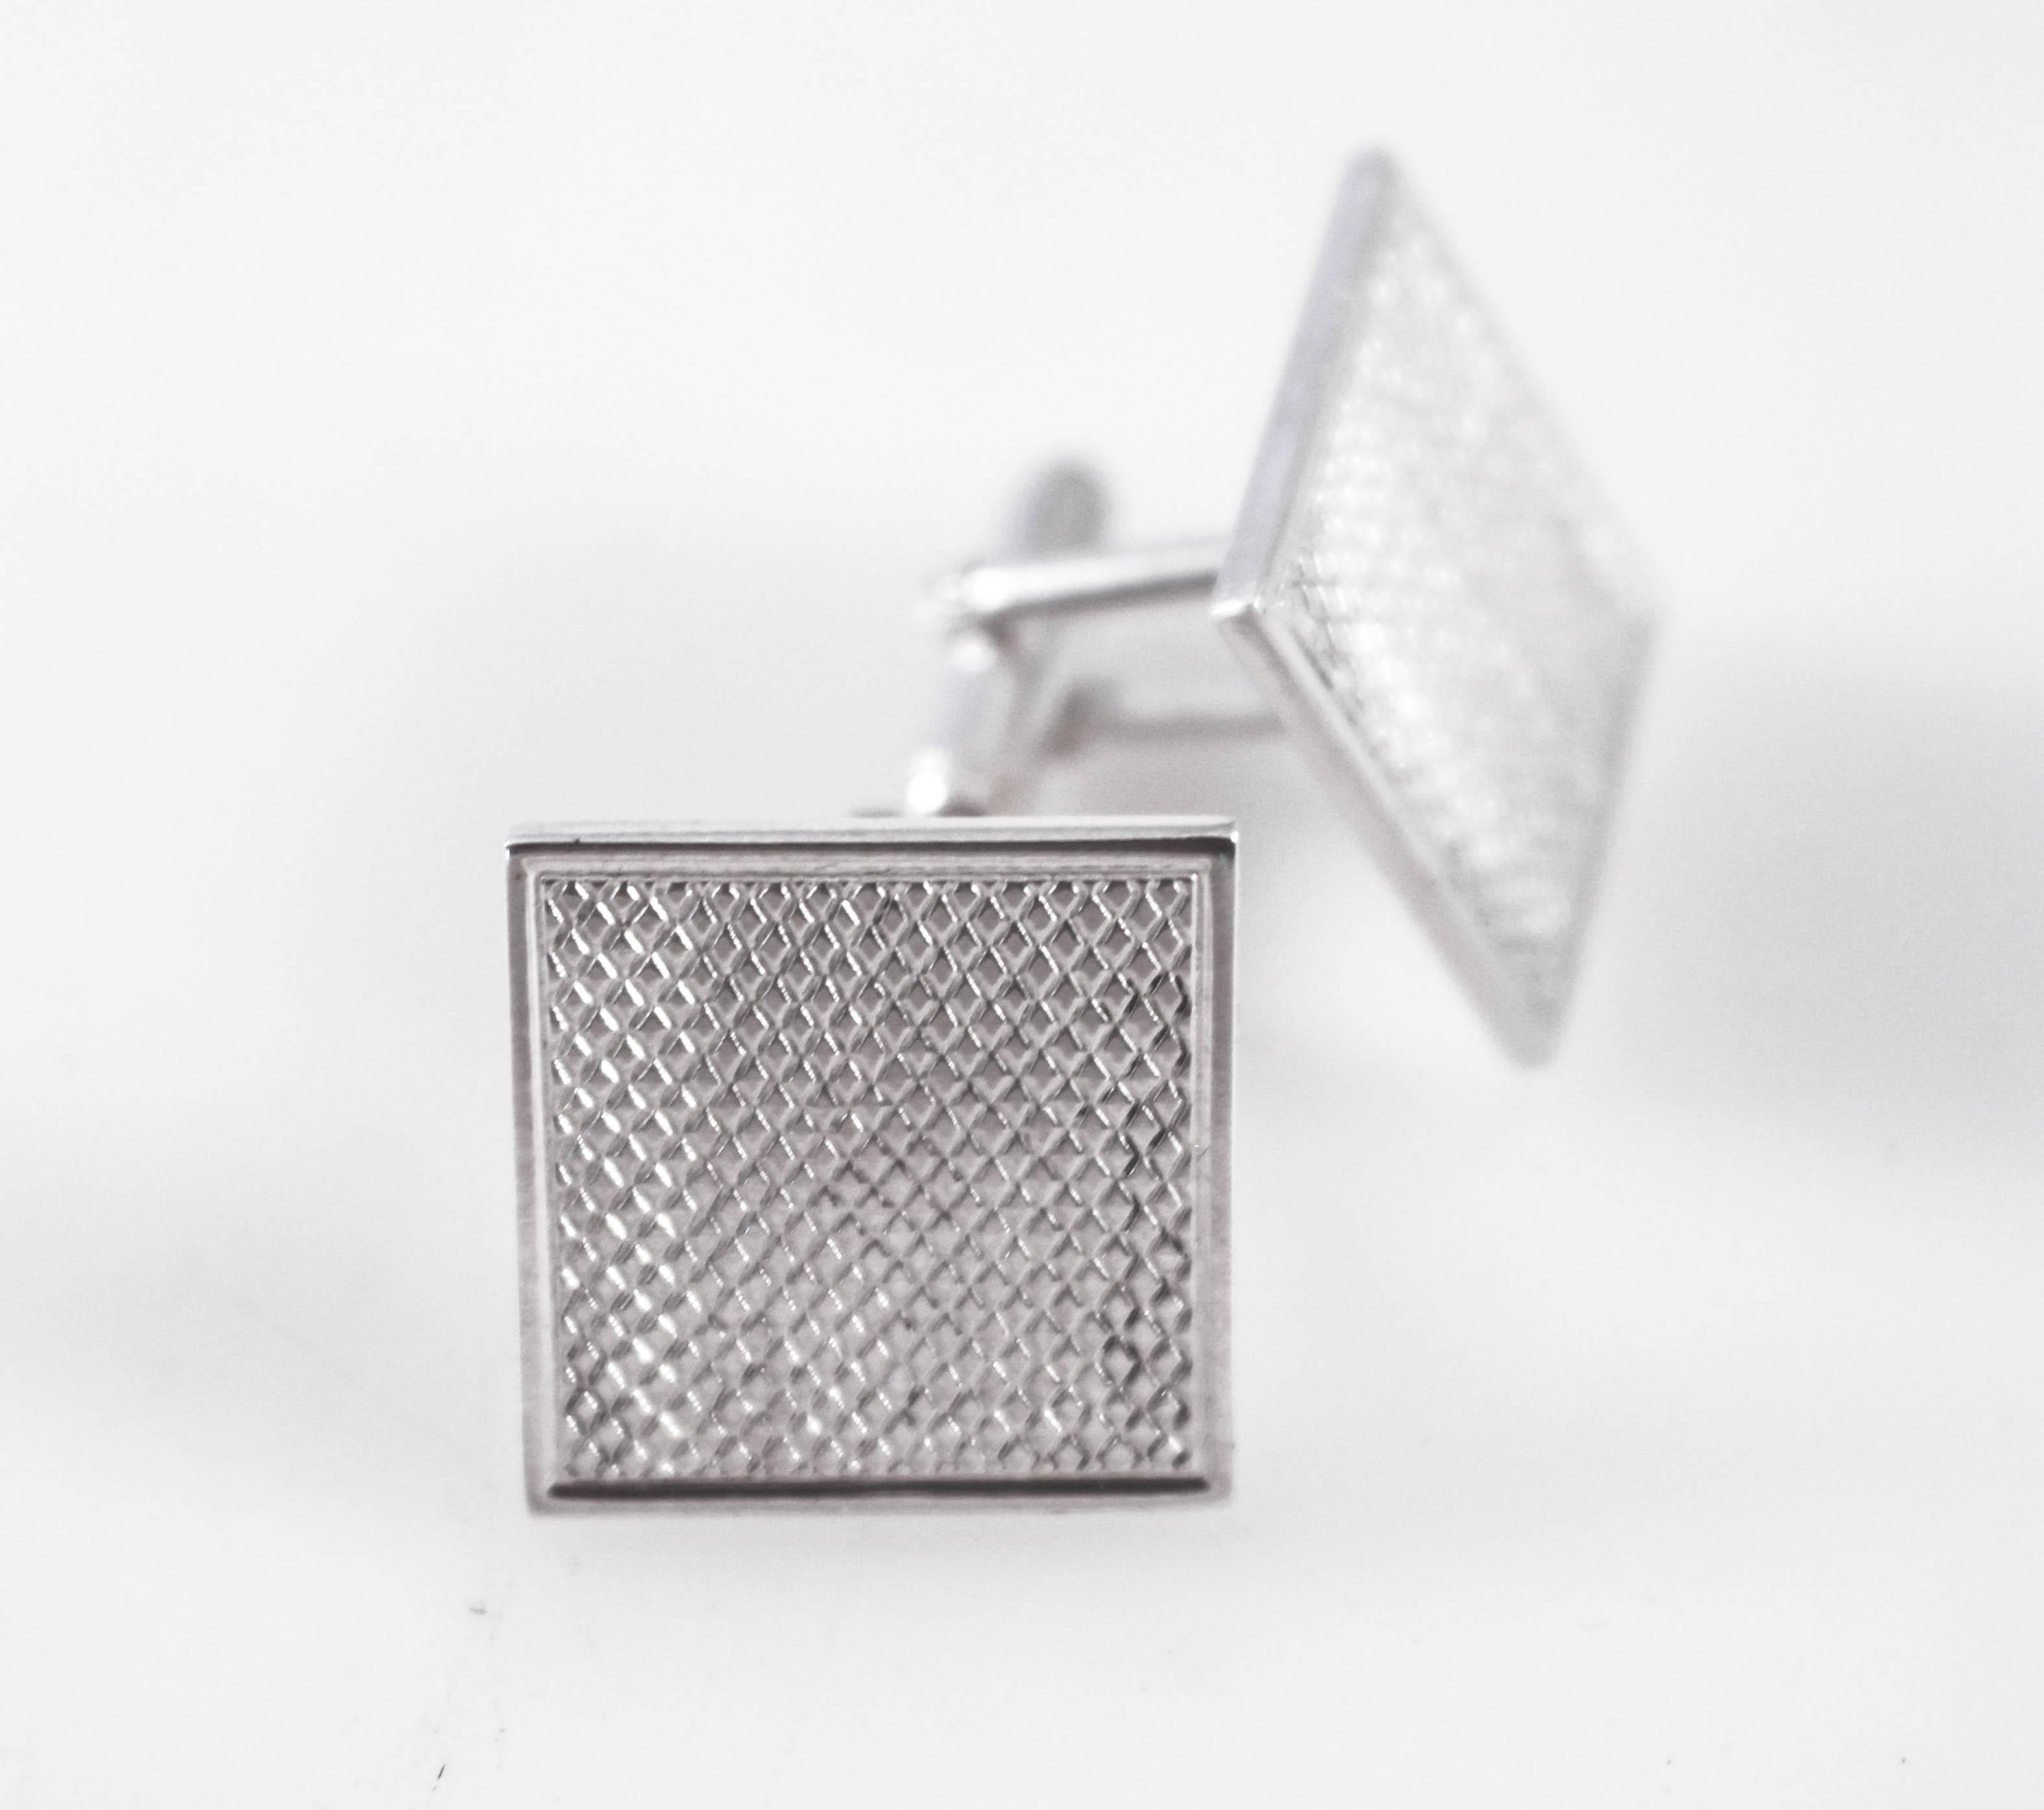 Just in time for Father’s Day and/or graduation, we are offering these sterling silver cufflinks. Made in England, they have an engine-turned design. They are sophisticated and timeless, can be worn with a suit or formal attire. Give that special